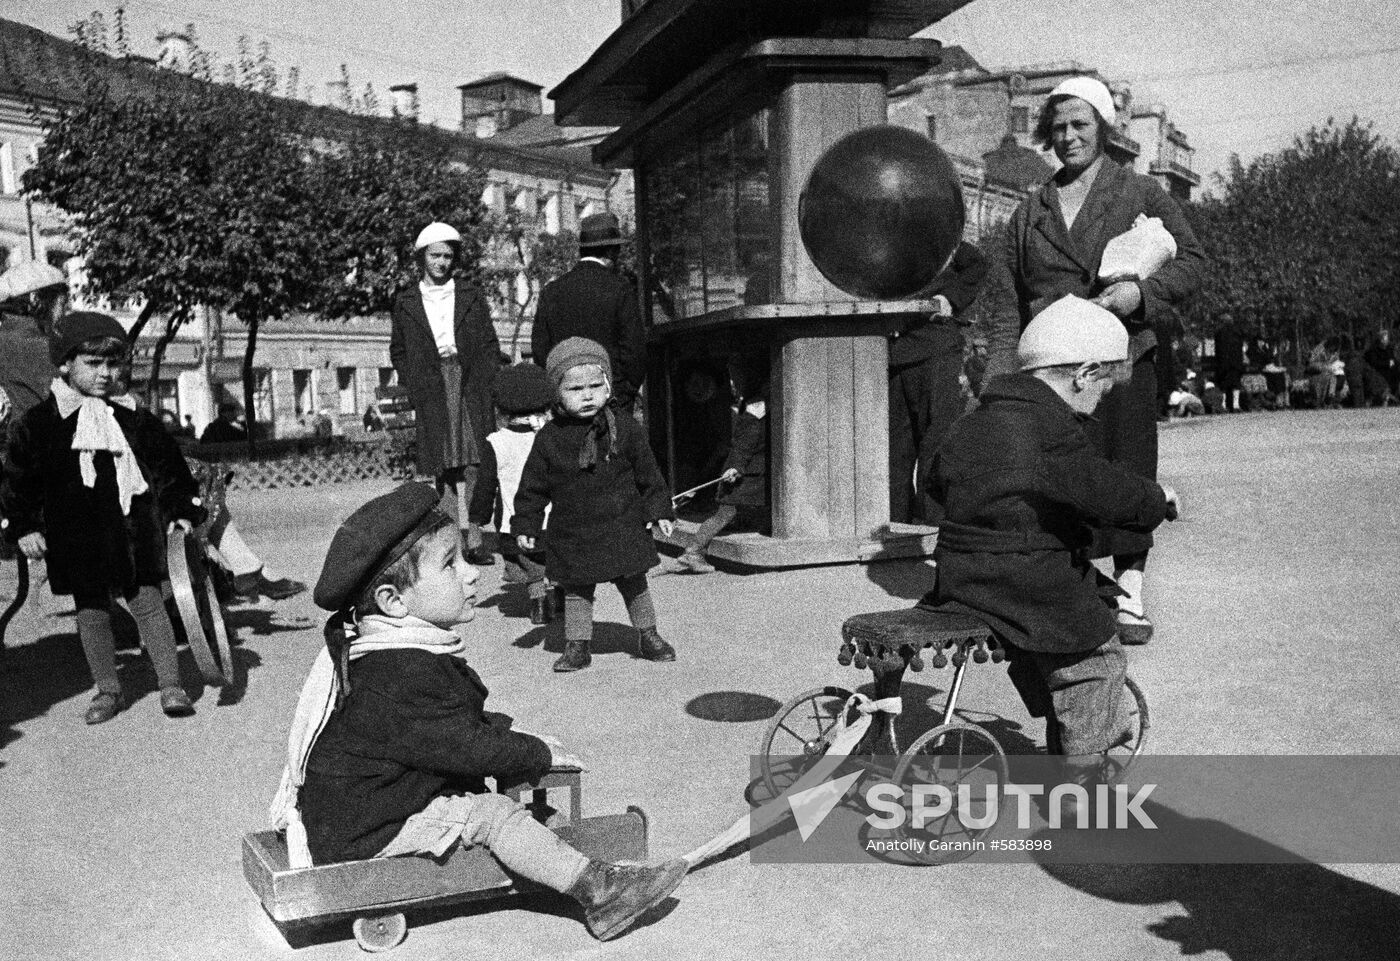 Young Muscovites playing in park